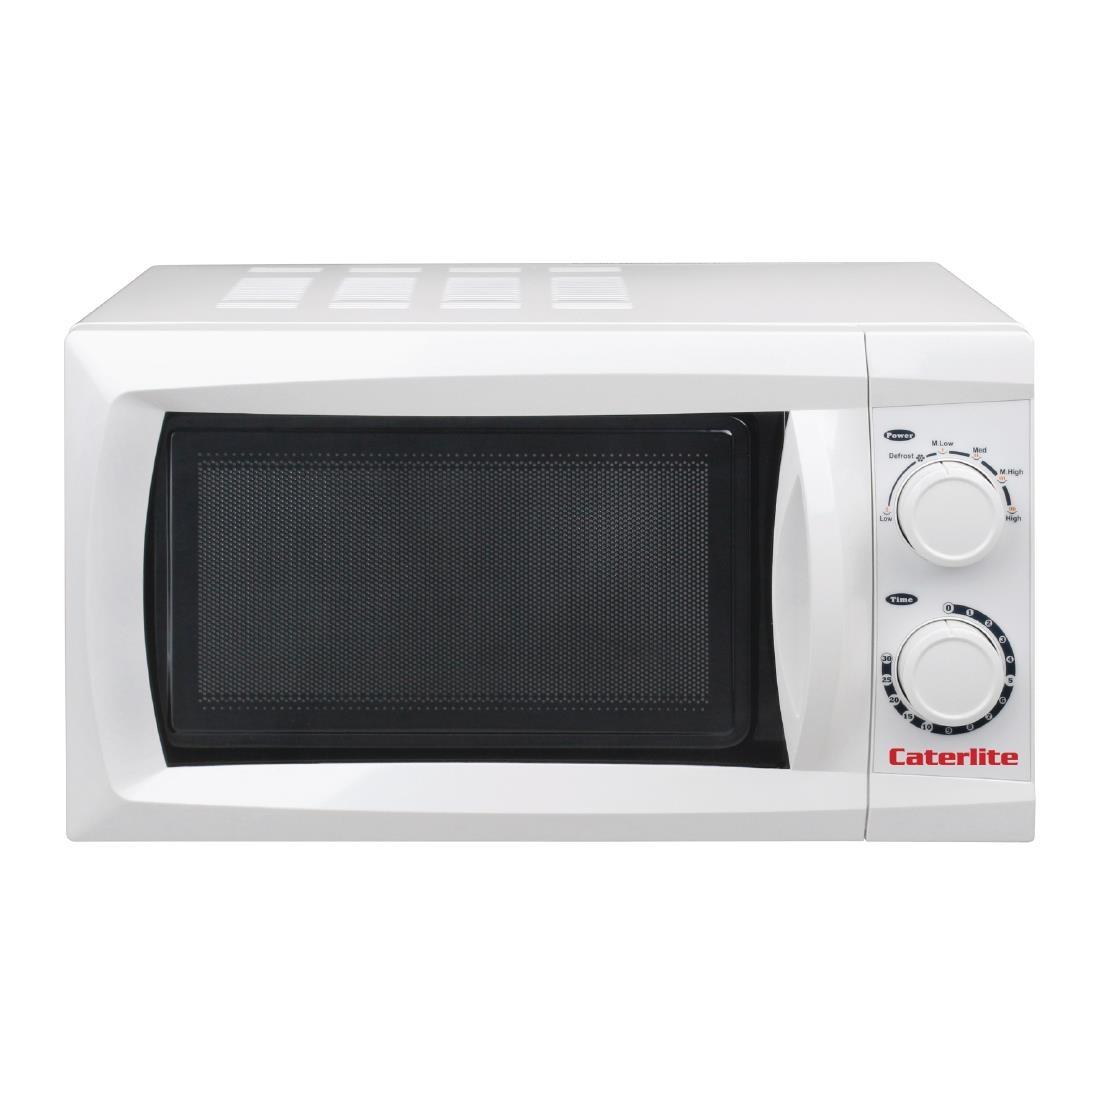 Caterlite Compact Microwave 17ltr 700W - CN180  - 8